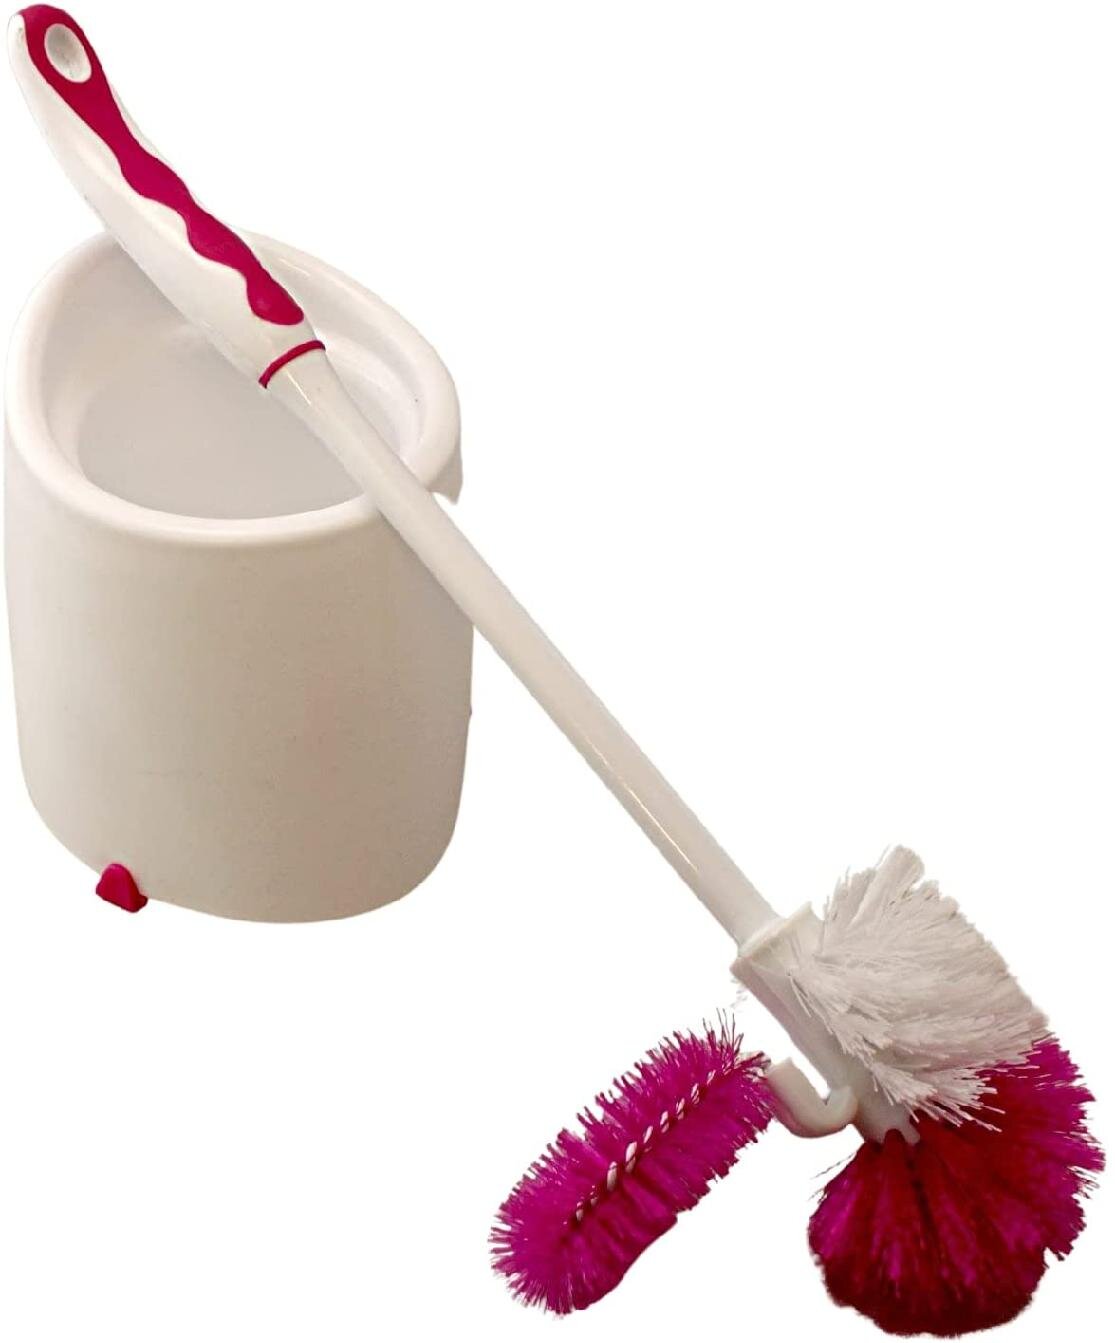 Pink Bendable Brush Head Deep-Cleaning Silicone Toilet Bowl Brush&Holder Set US 